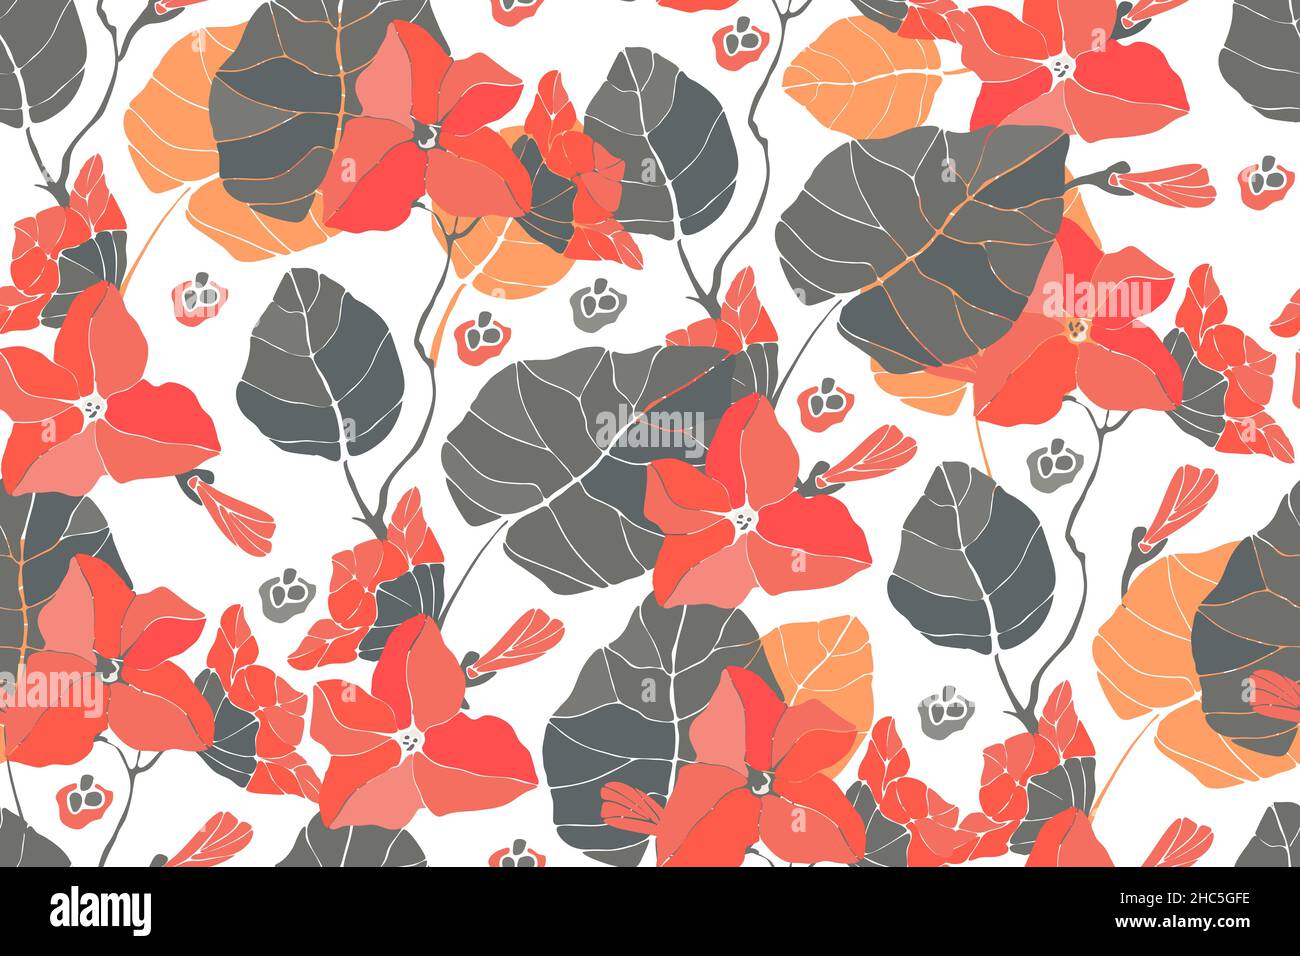 Art floral vector seamless pattern. Red flowers. Stock Vector